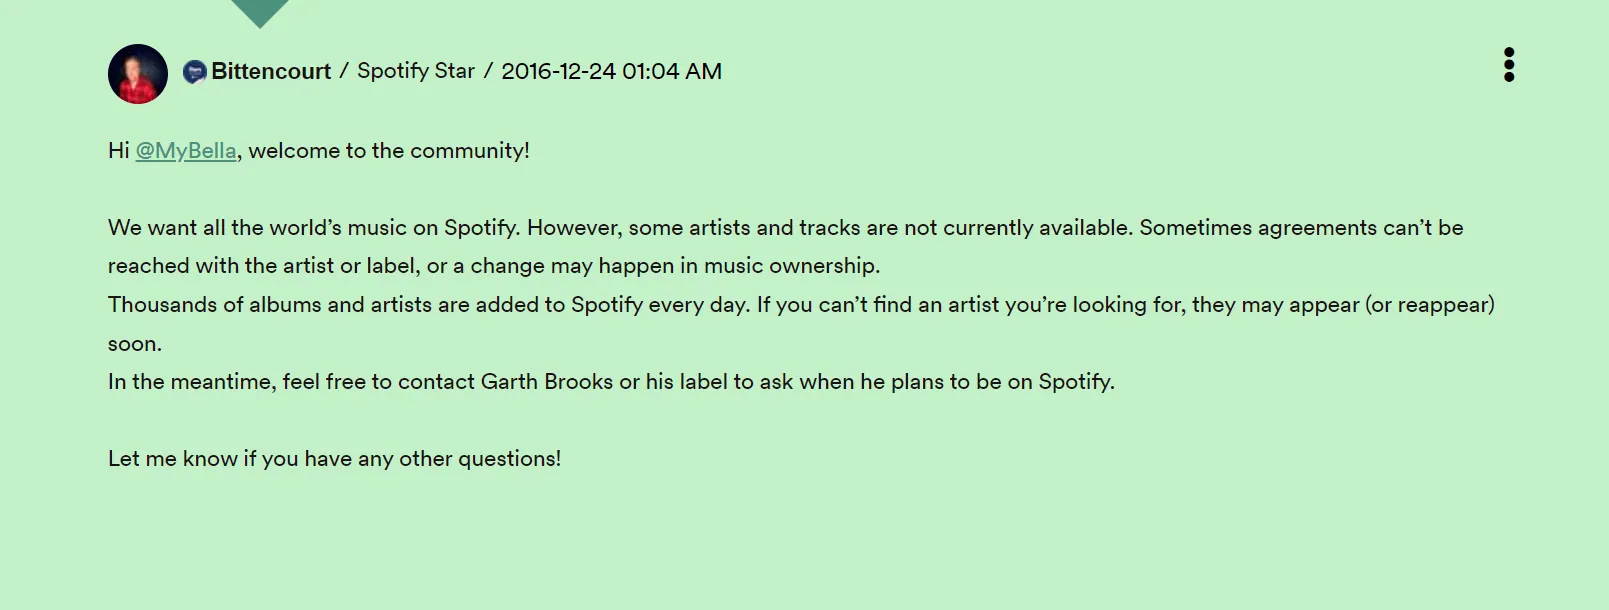 Screen shot from Spotify Community for Garth Brook Absence